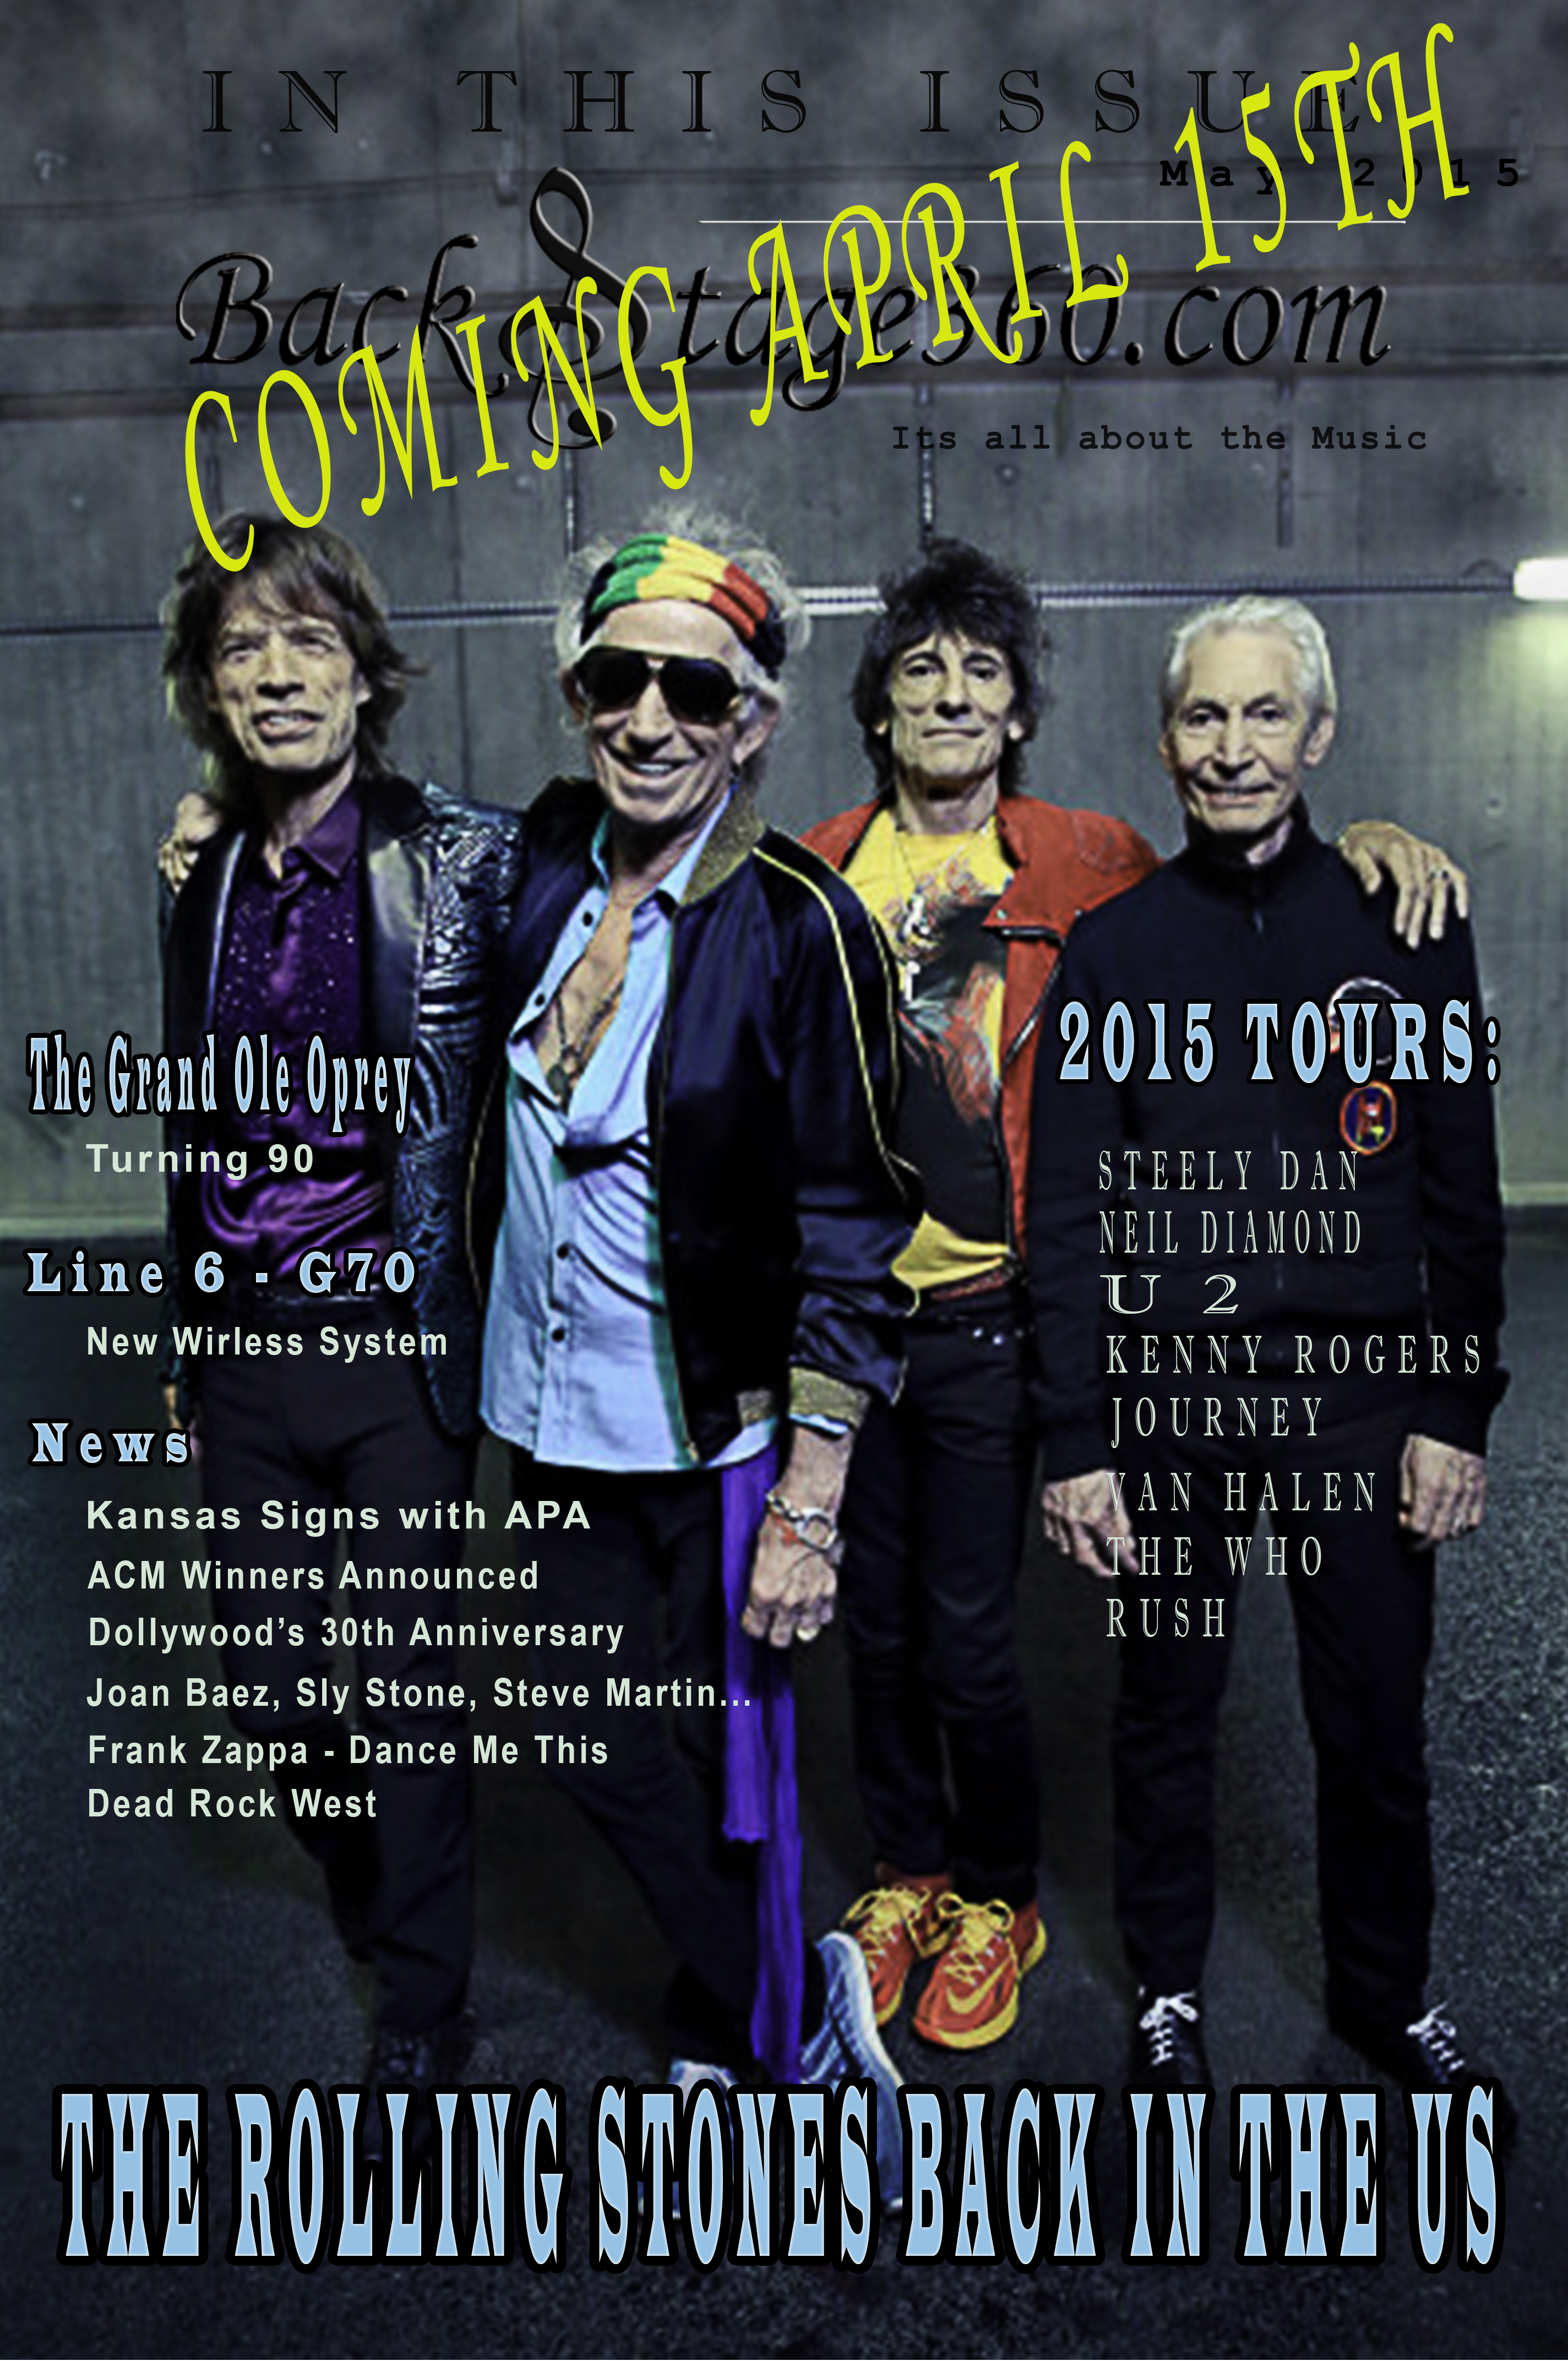 Backstage Cover May 2015